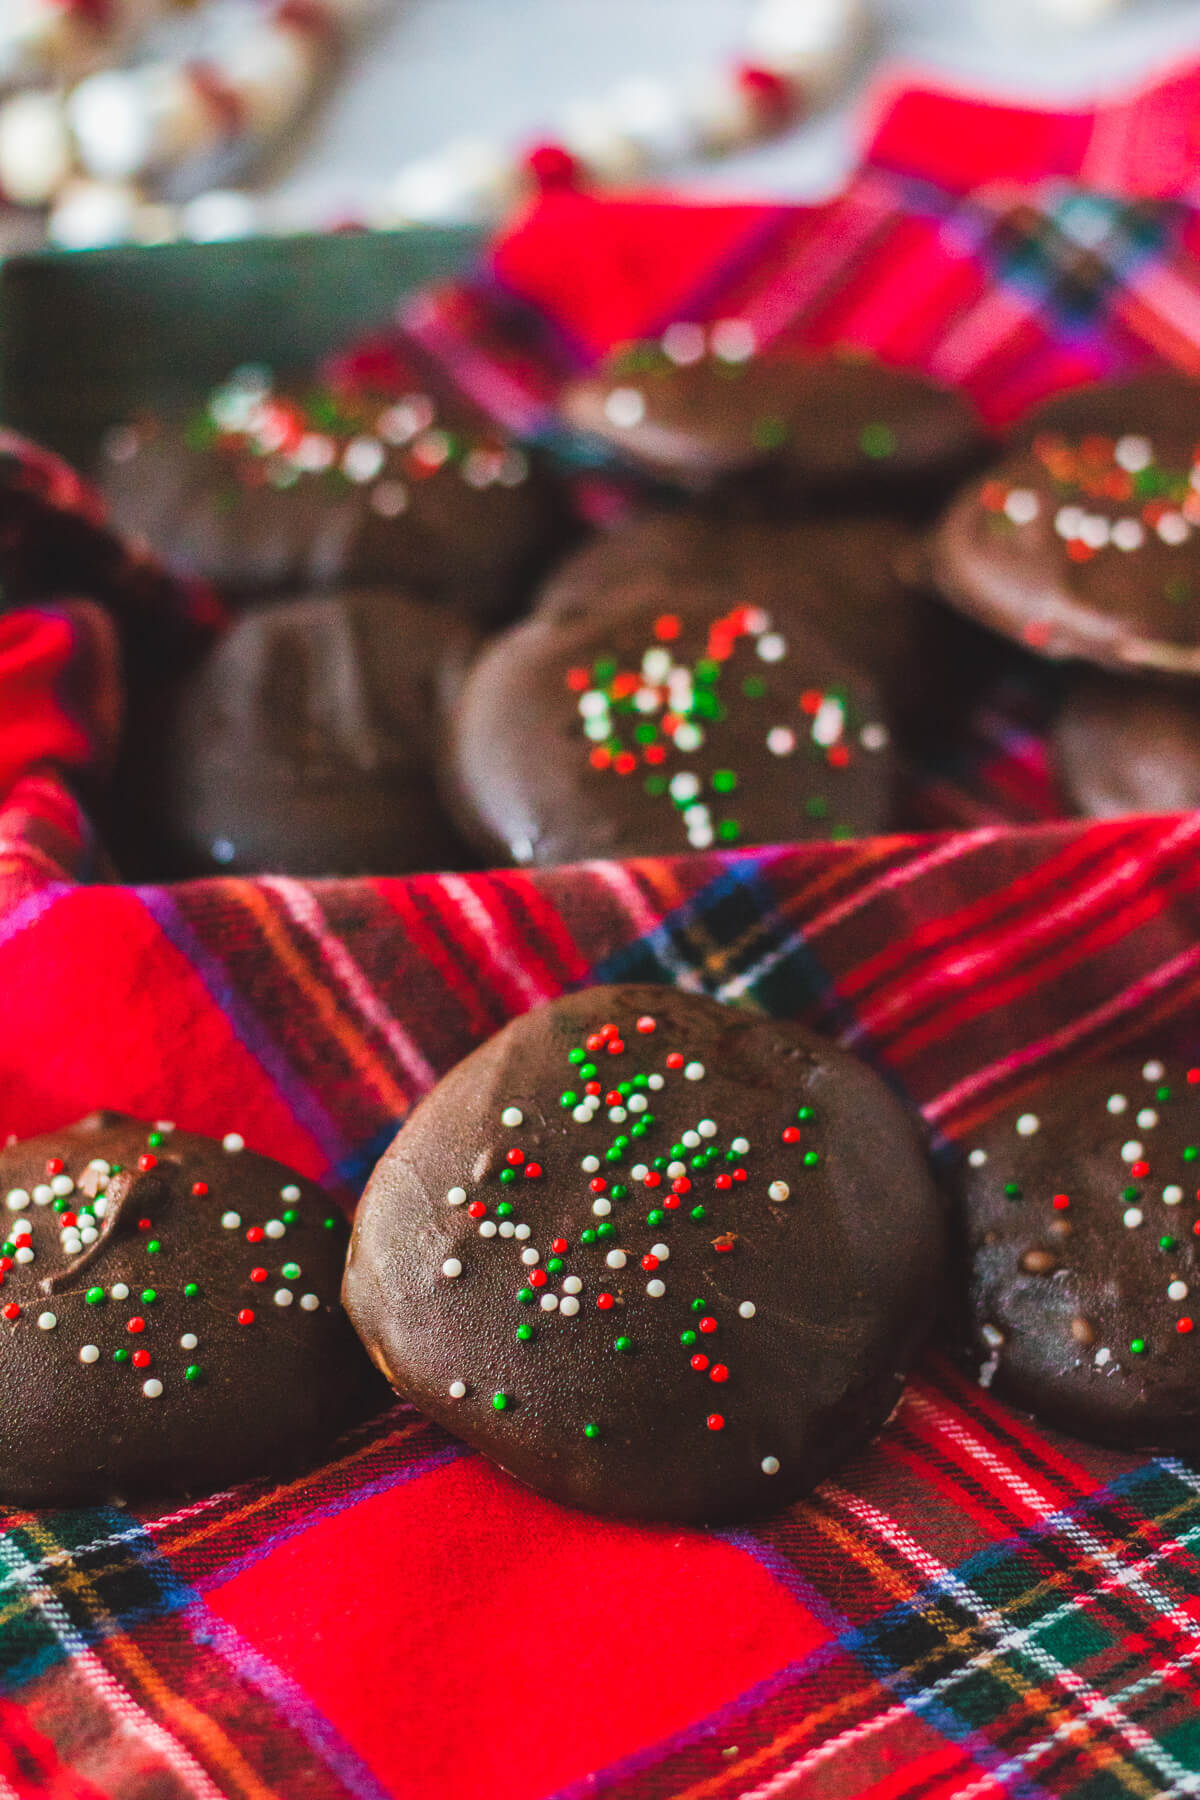 A group of dark chocolate coated peppermint patty candies on a plaid tablecloth.